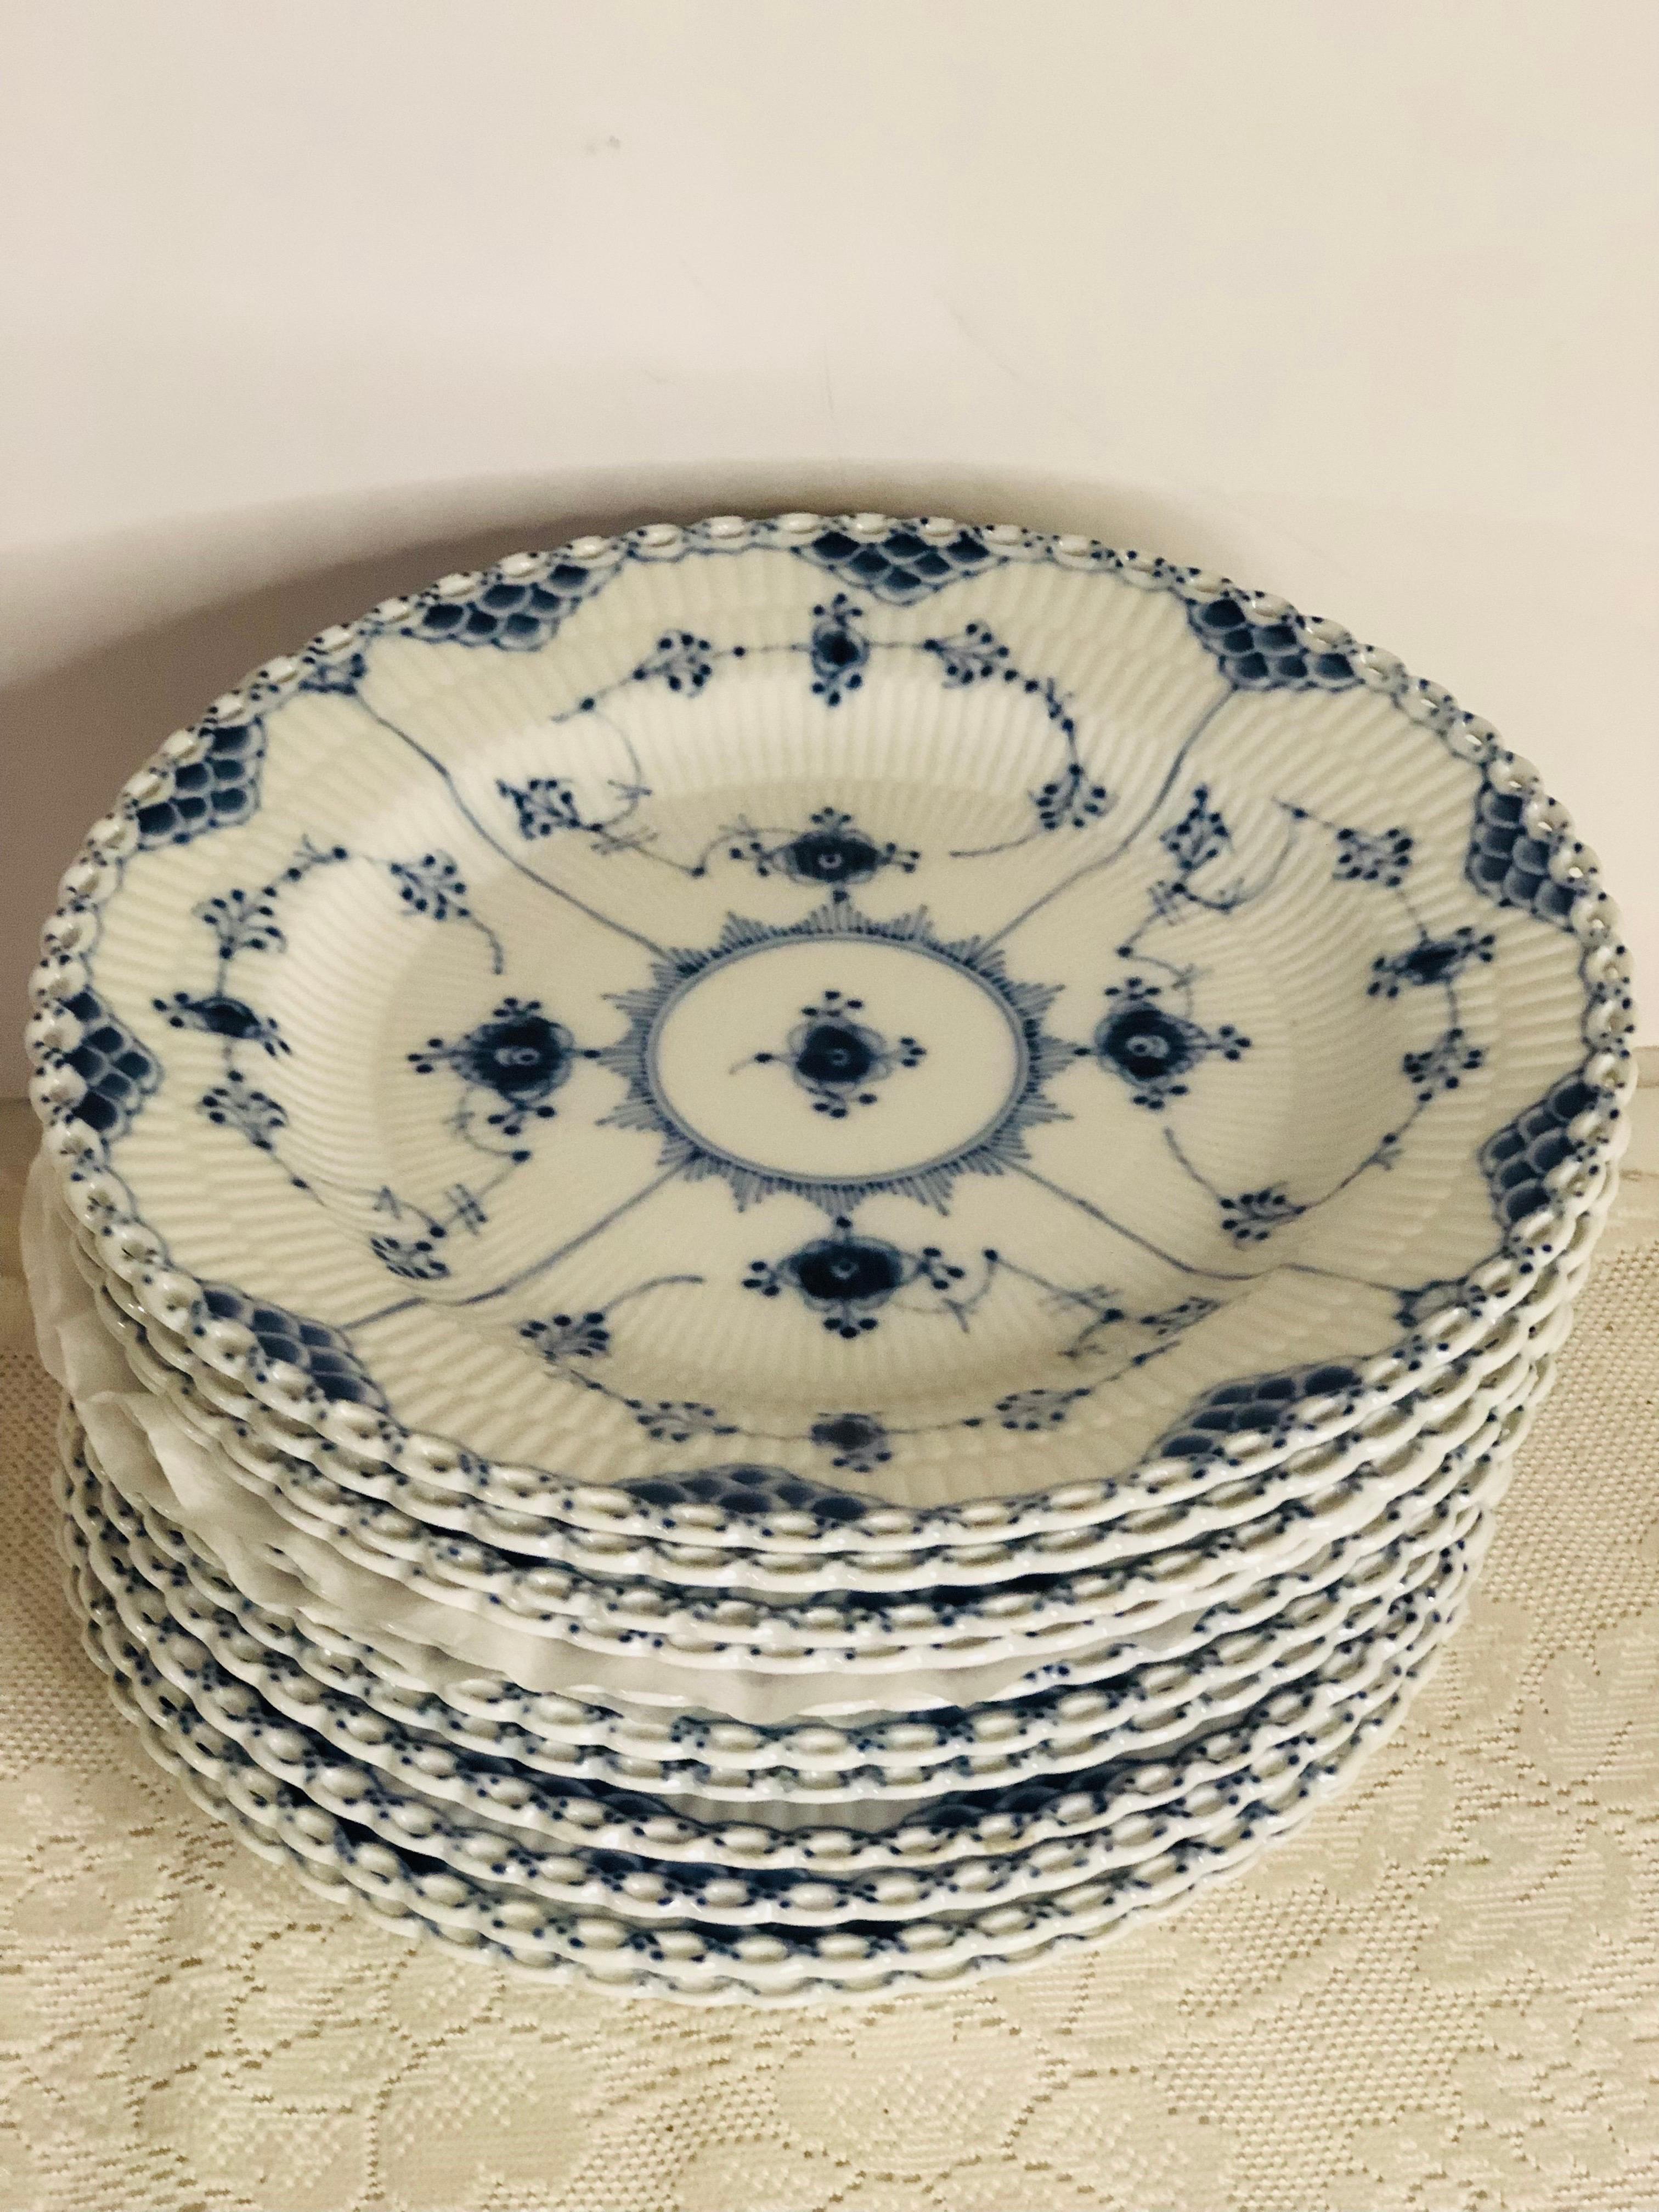 I want to offer you this fabulous set of eleven Royal Copenhagen fluted dinner plates with full lace openwork design on the borders. This full lace fluted dinnerware was the first dinner service sold by Royal Copenhagen in 1775. In 1885, the